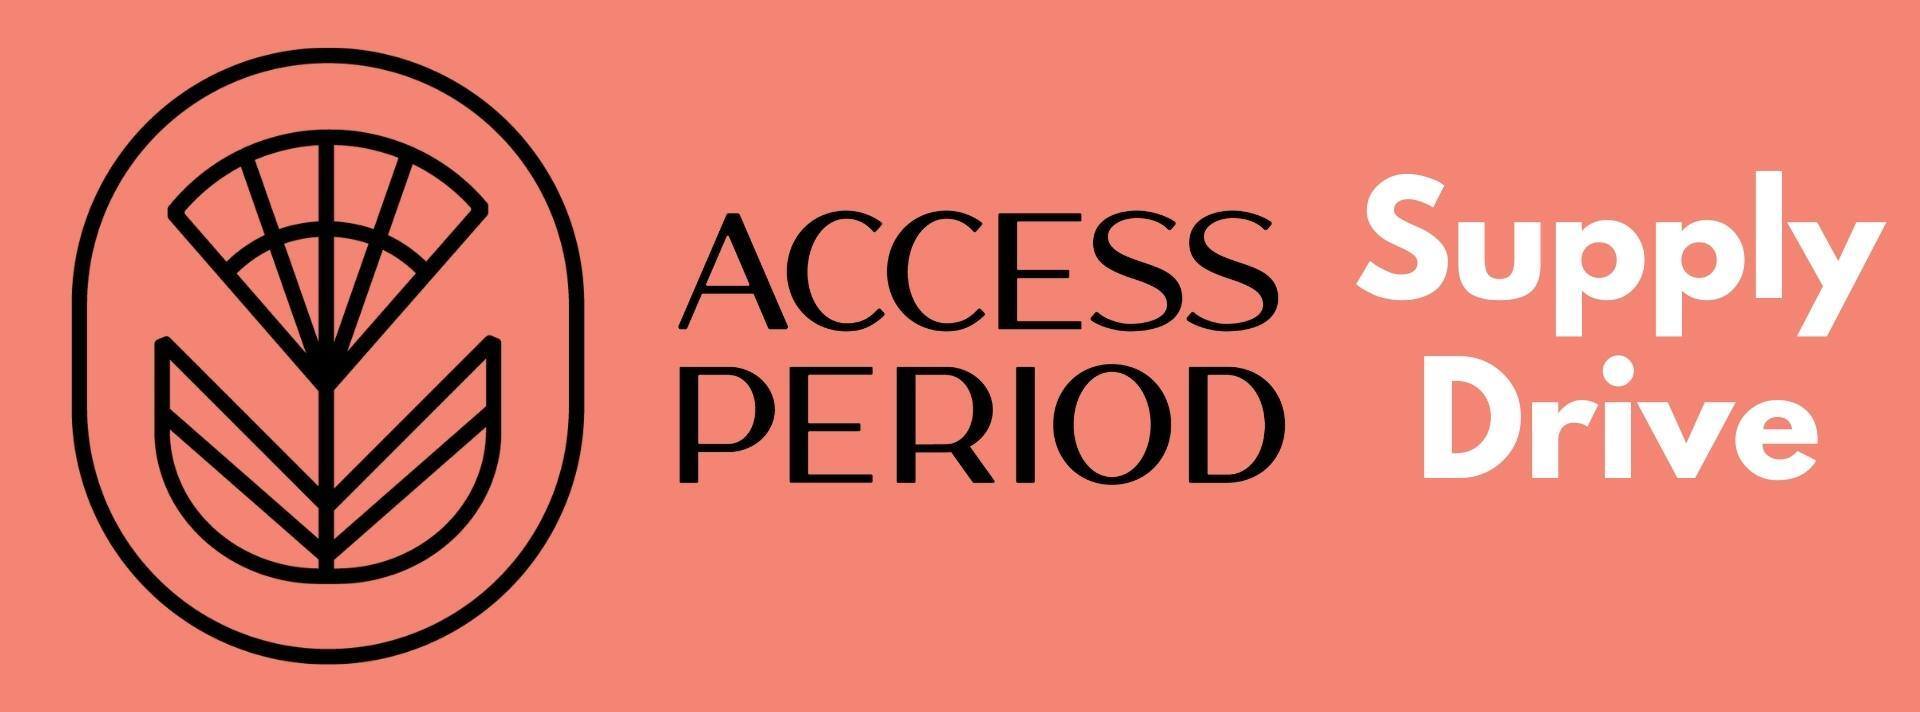 Banner Access Period Supply Drive against a pink background